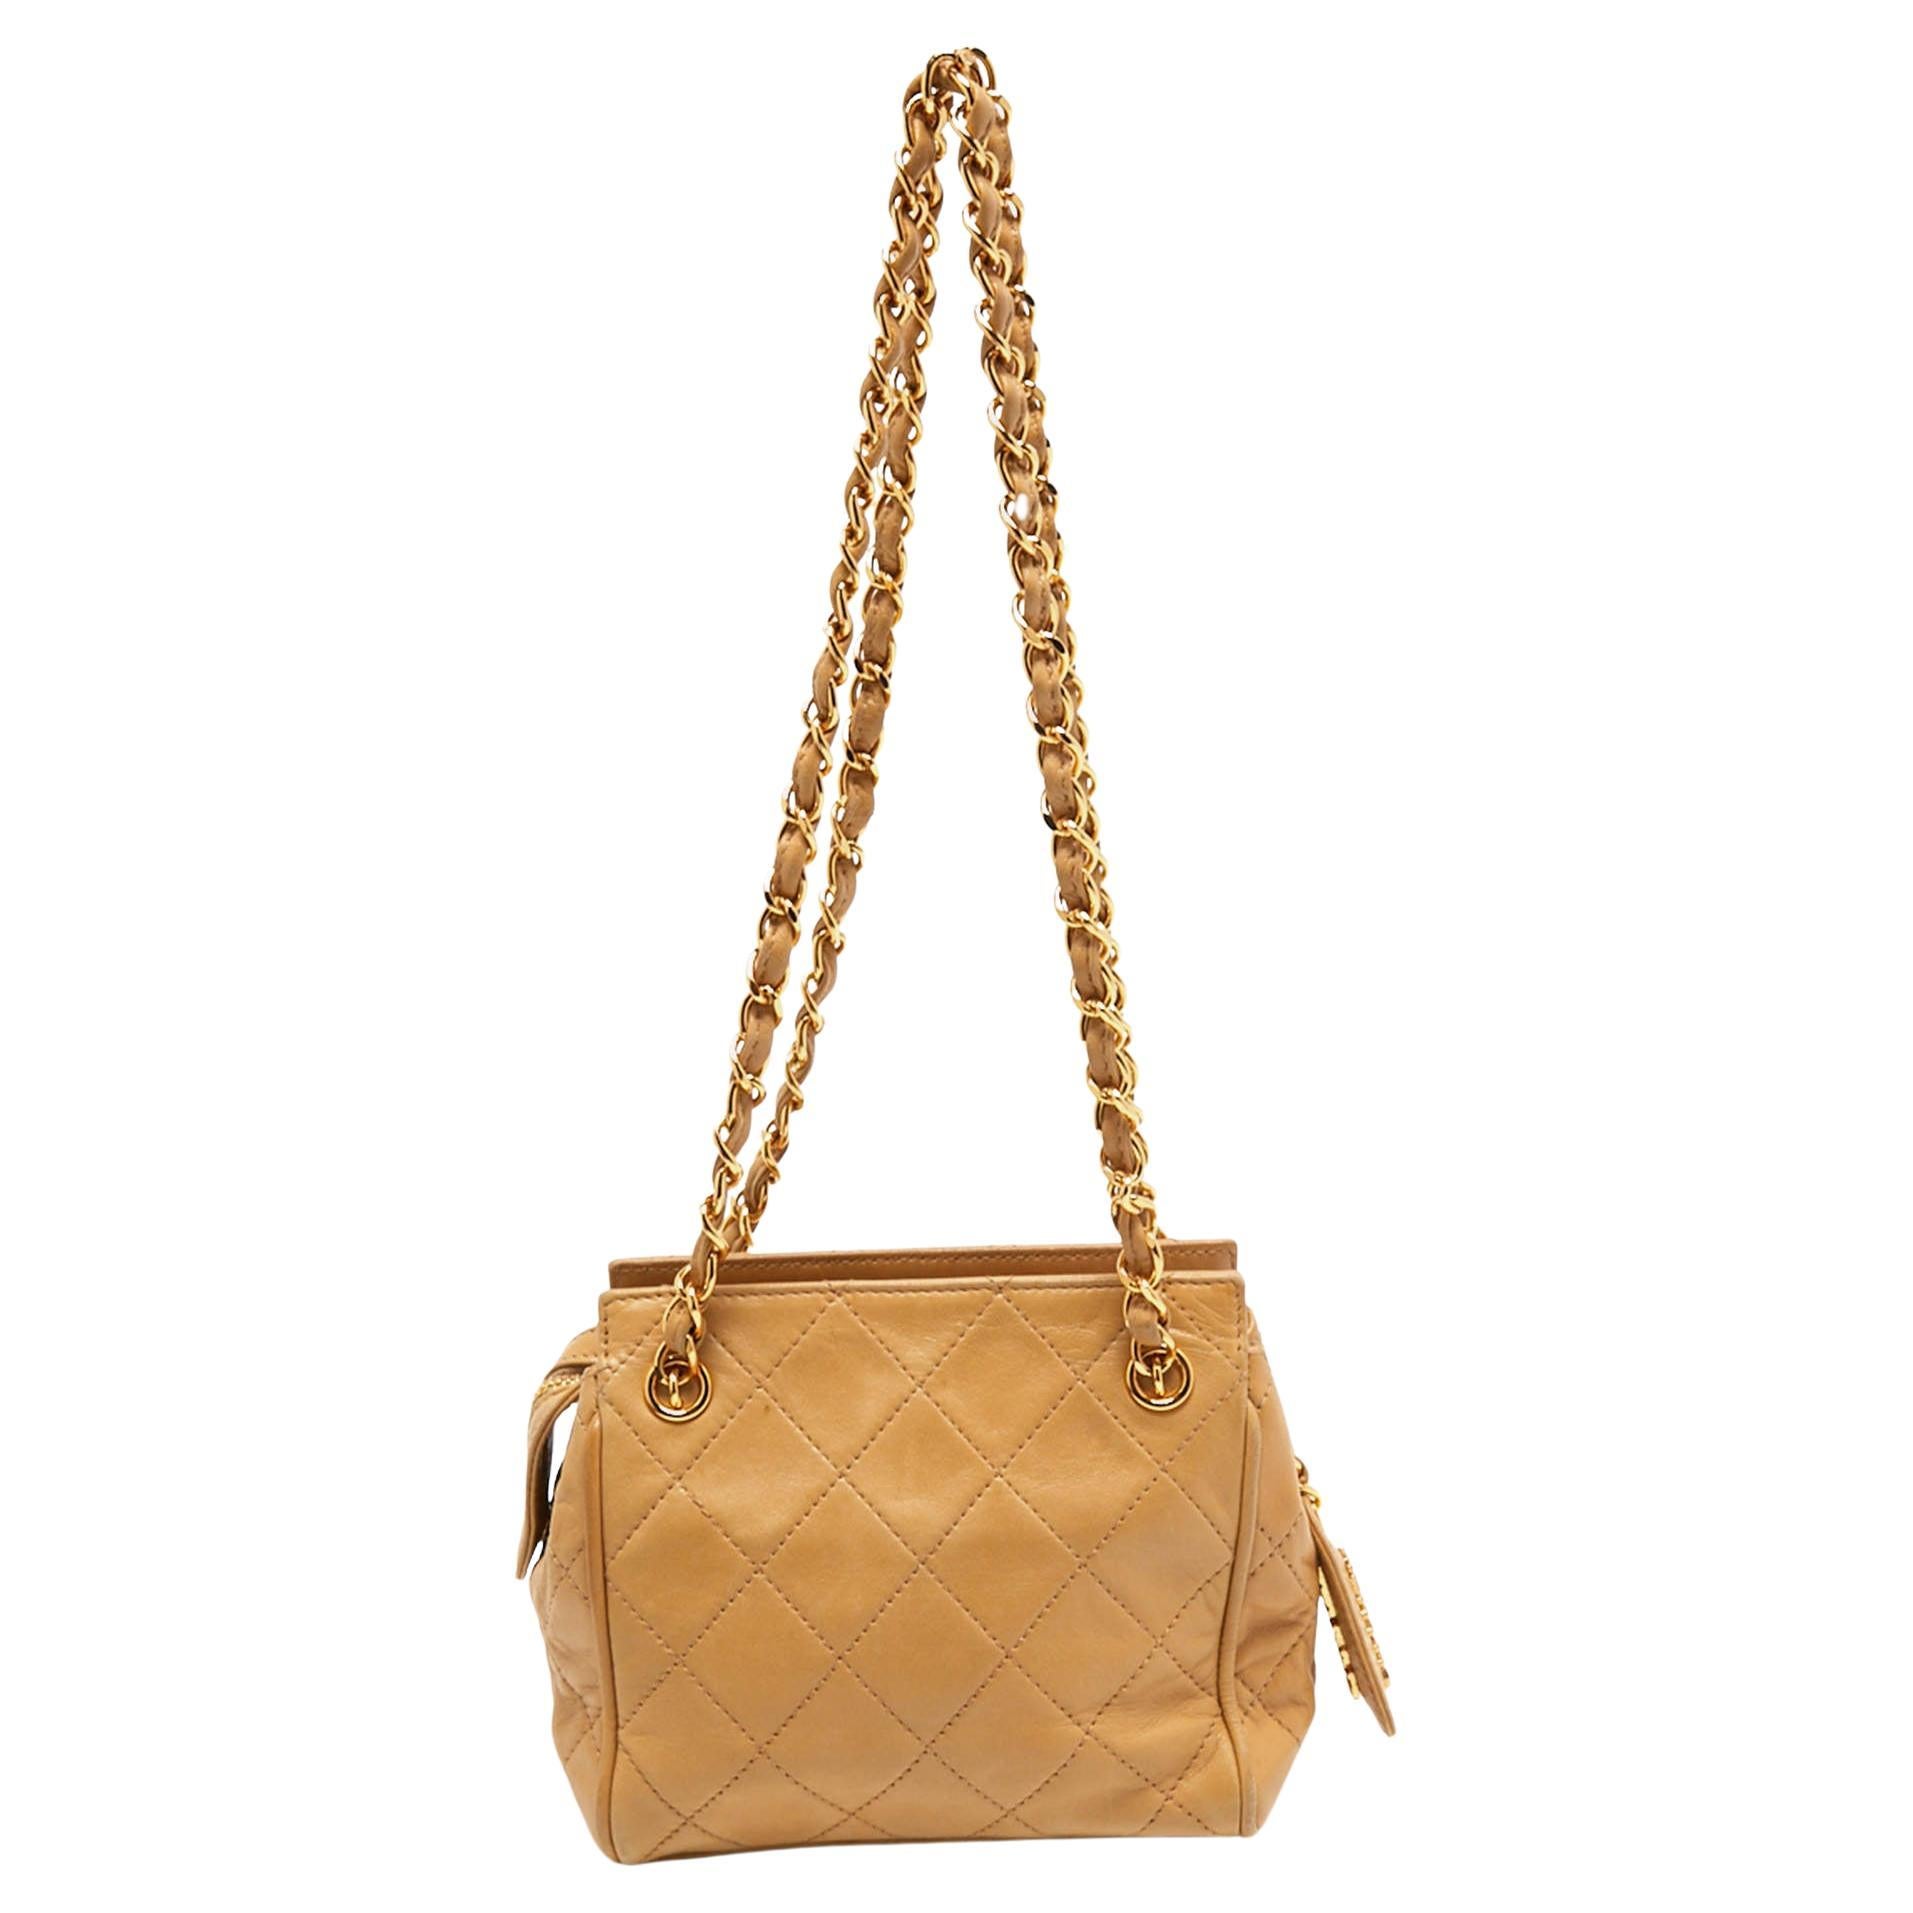 Chanel Beige Quilted Leather Mini Timeless Chain Tote